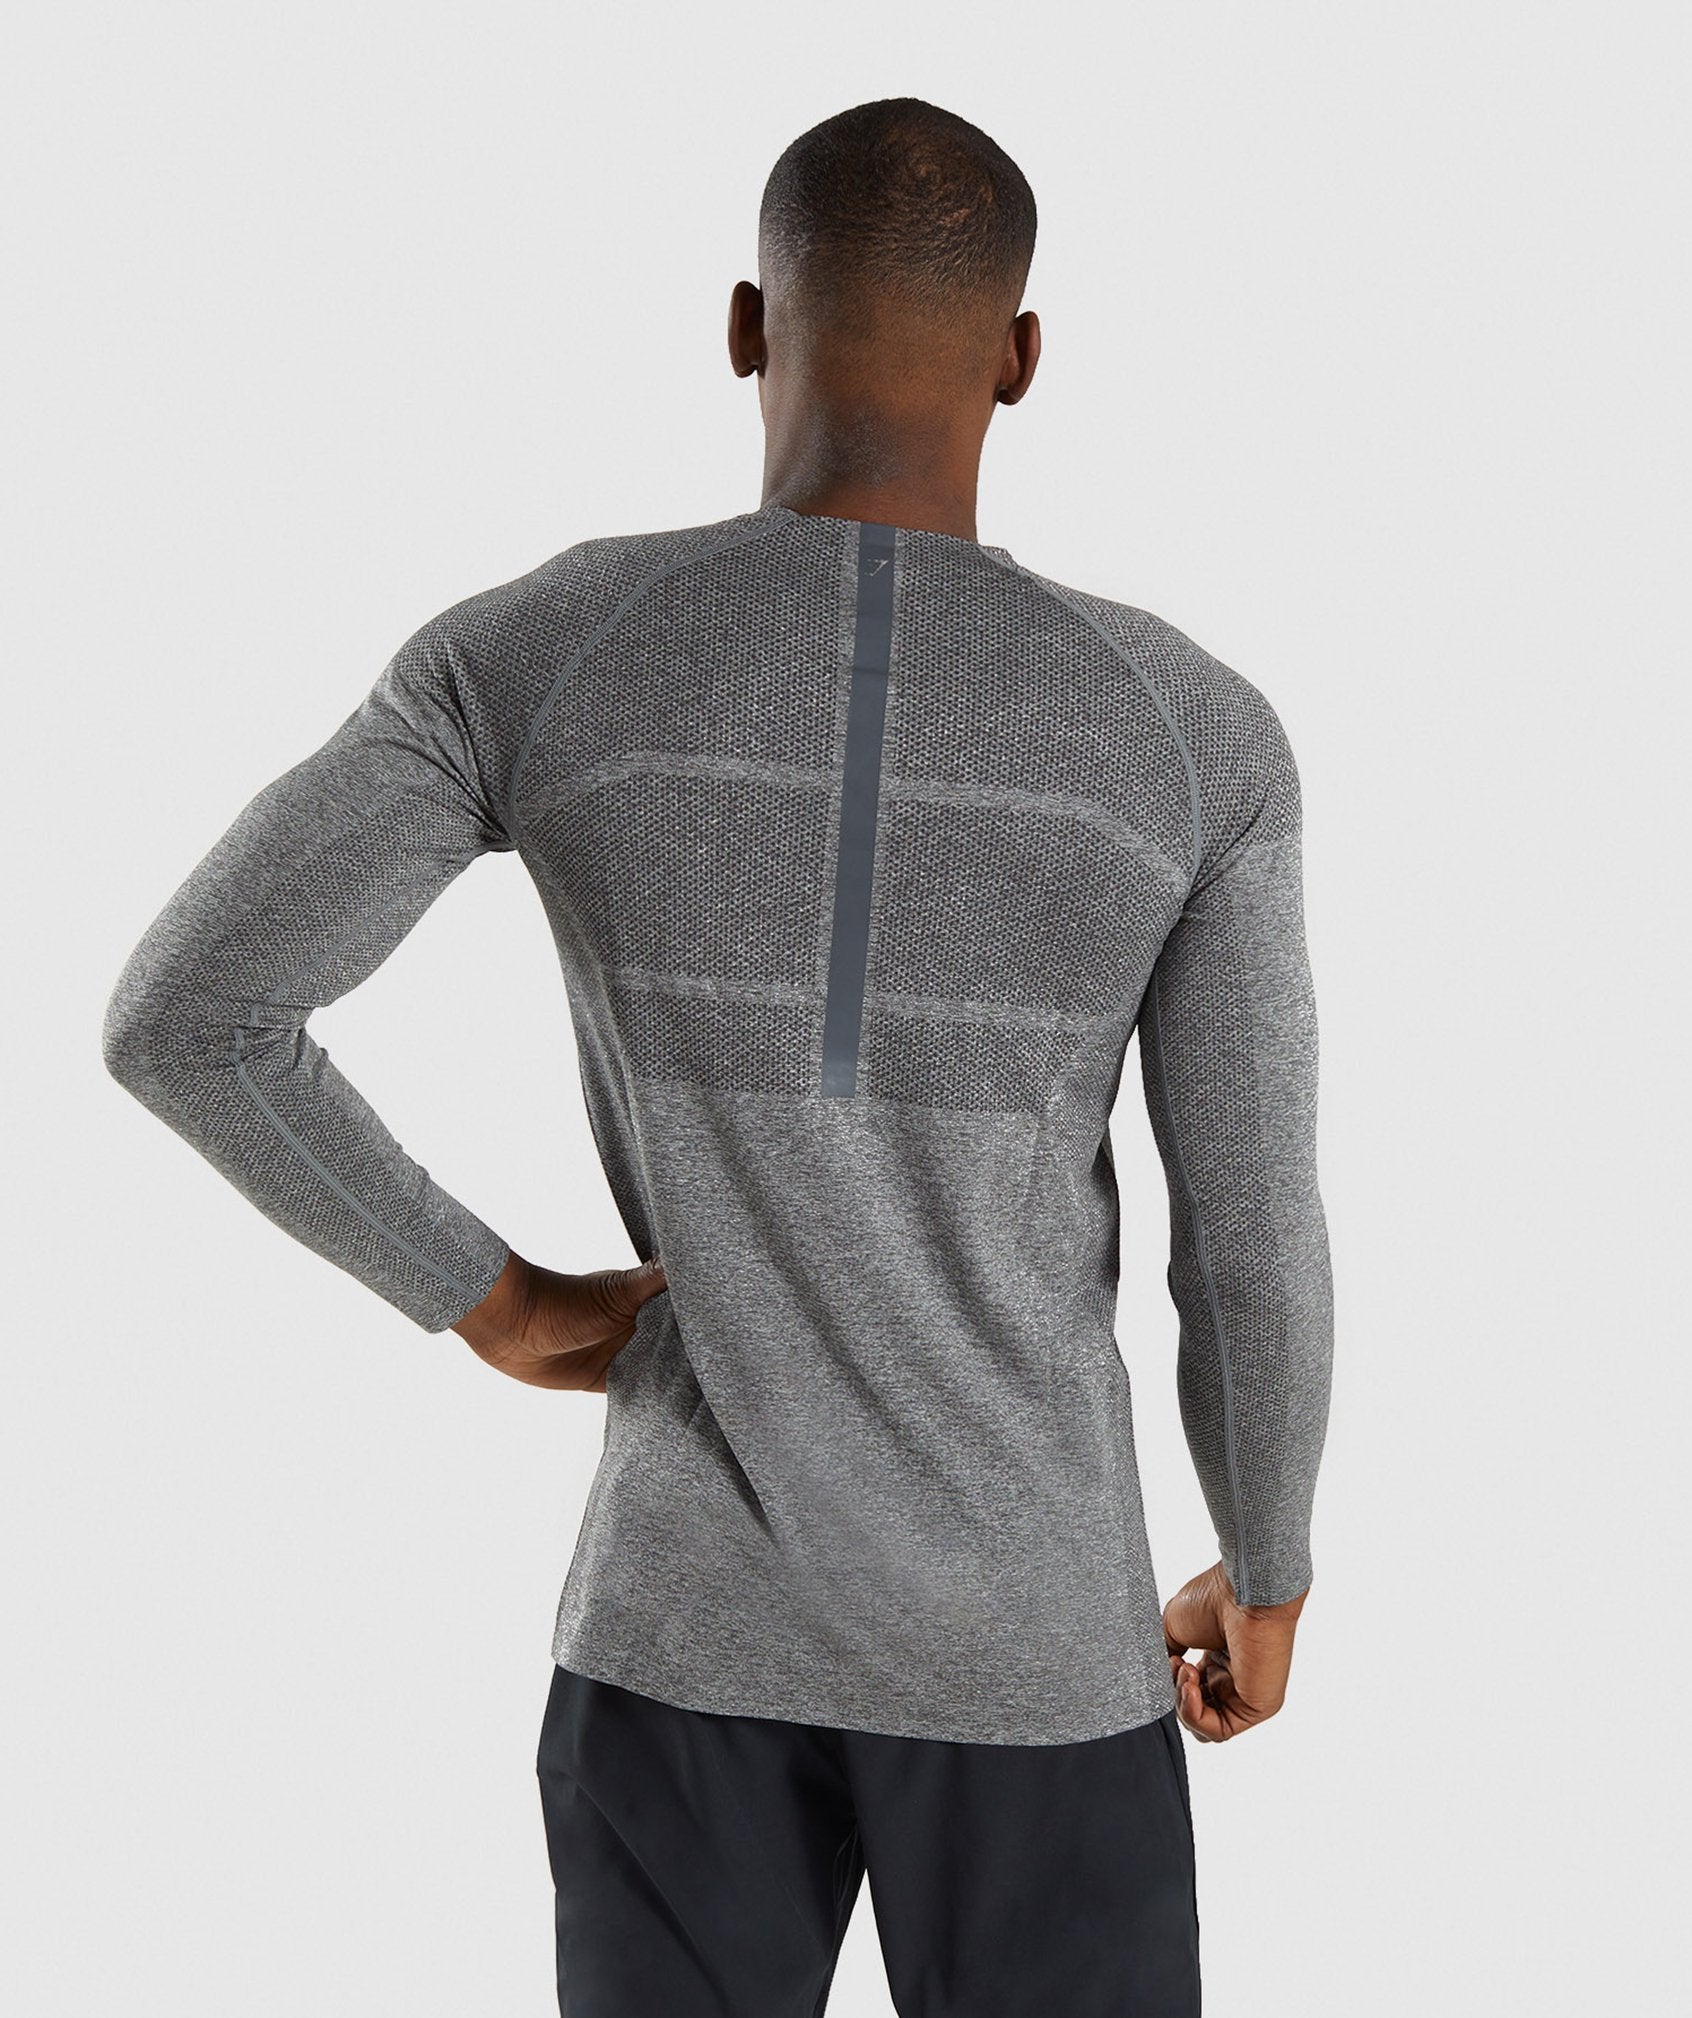 Shadow X Seamless Long Sleeve T-Shirt in Charcoal Marl - view 2